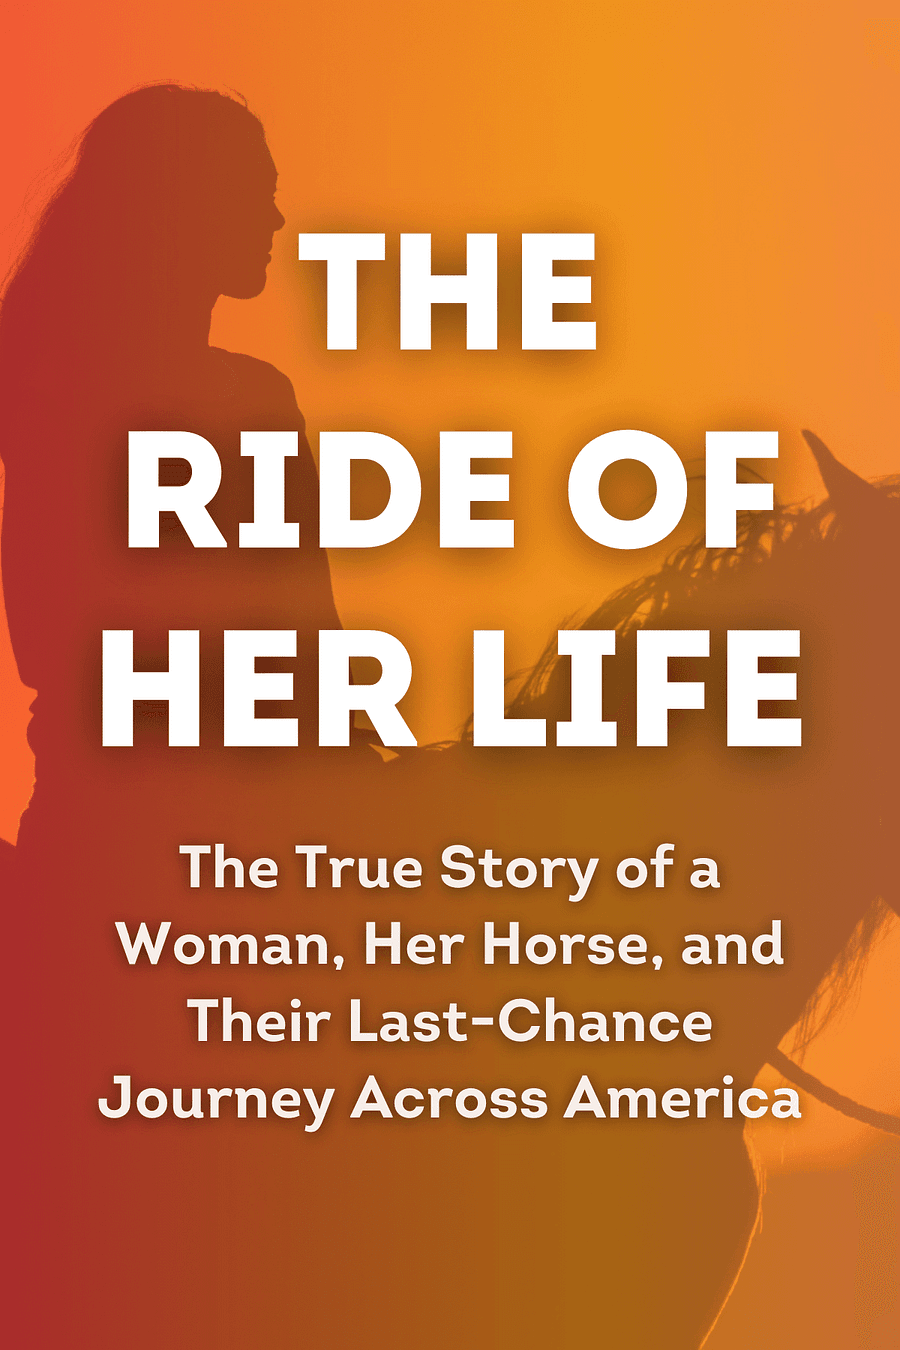 The Ride of Her Life by Elizabeth Letts - Book Summary